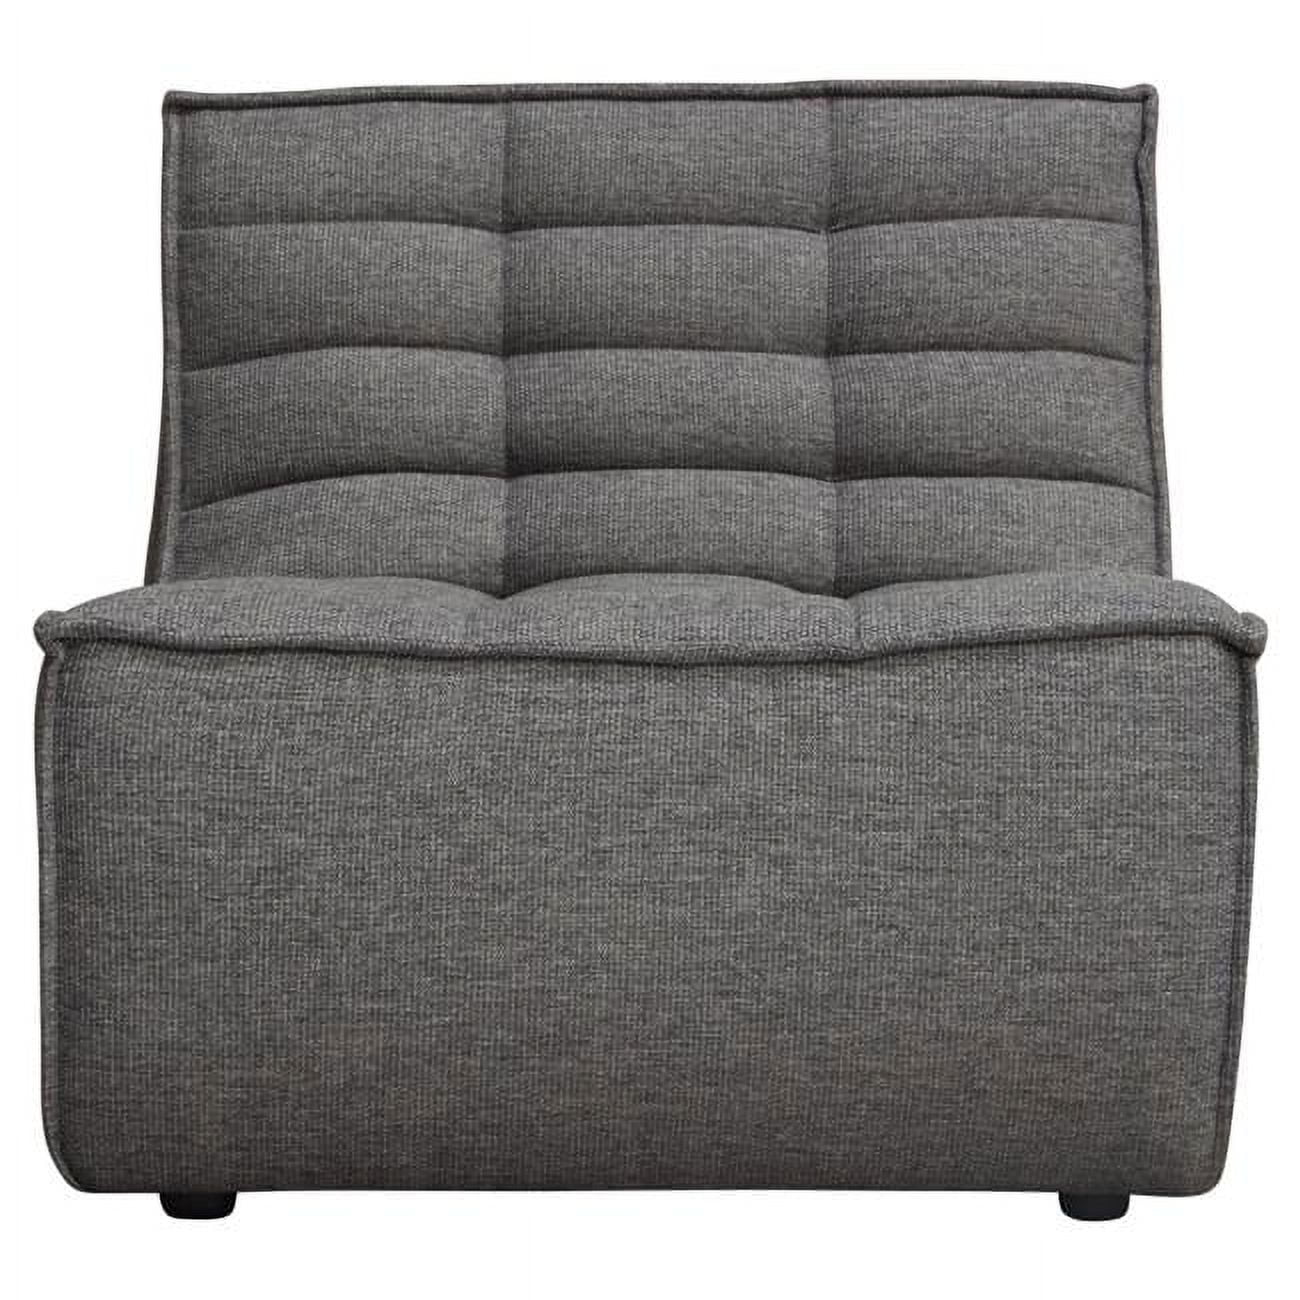 Picture of Diamond Sofa MARSHALLACGR Marshall Scooped Seat Armless Chair, Grey Fabric